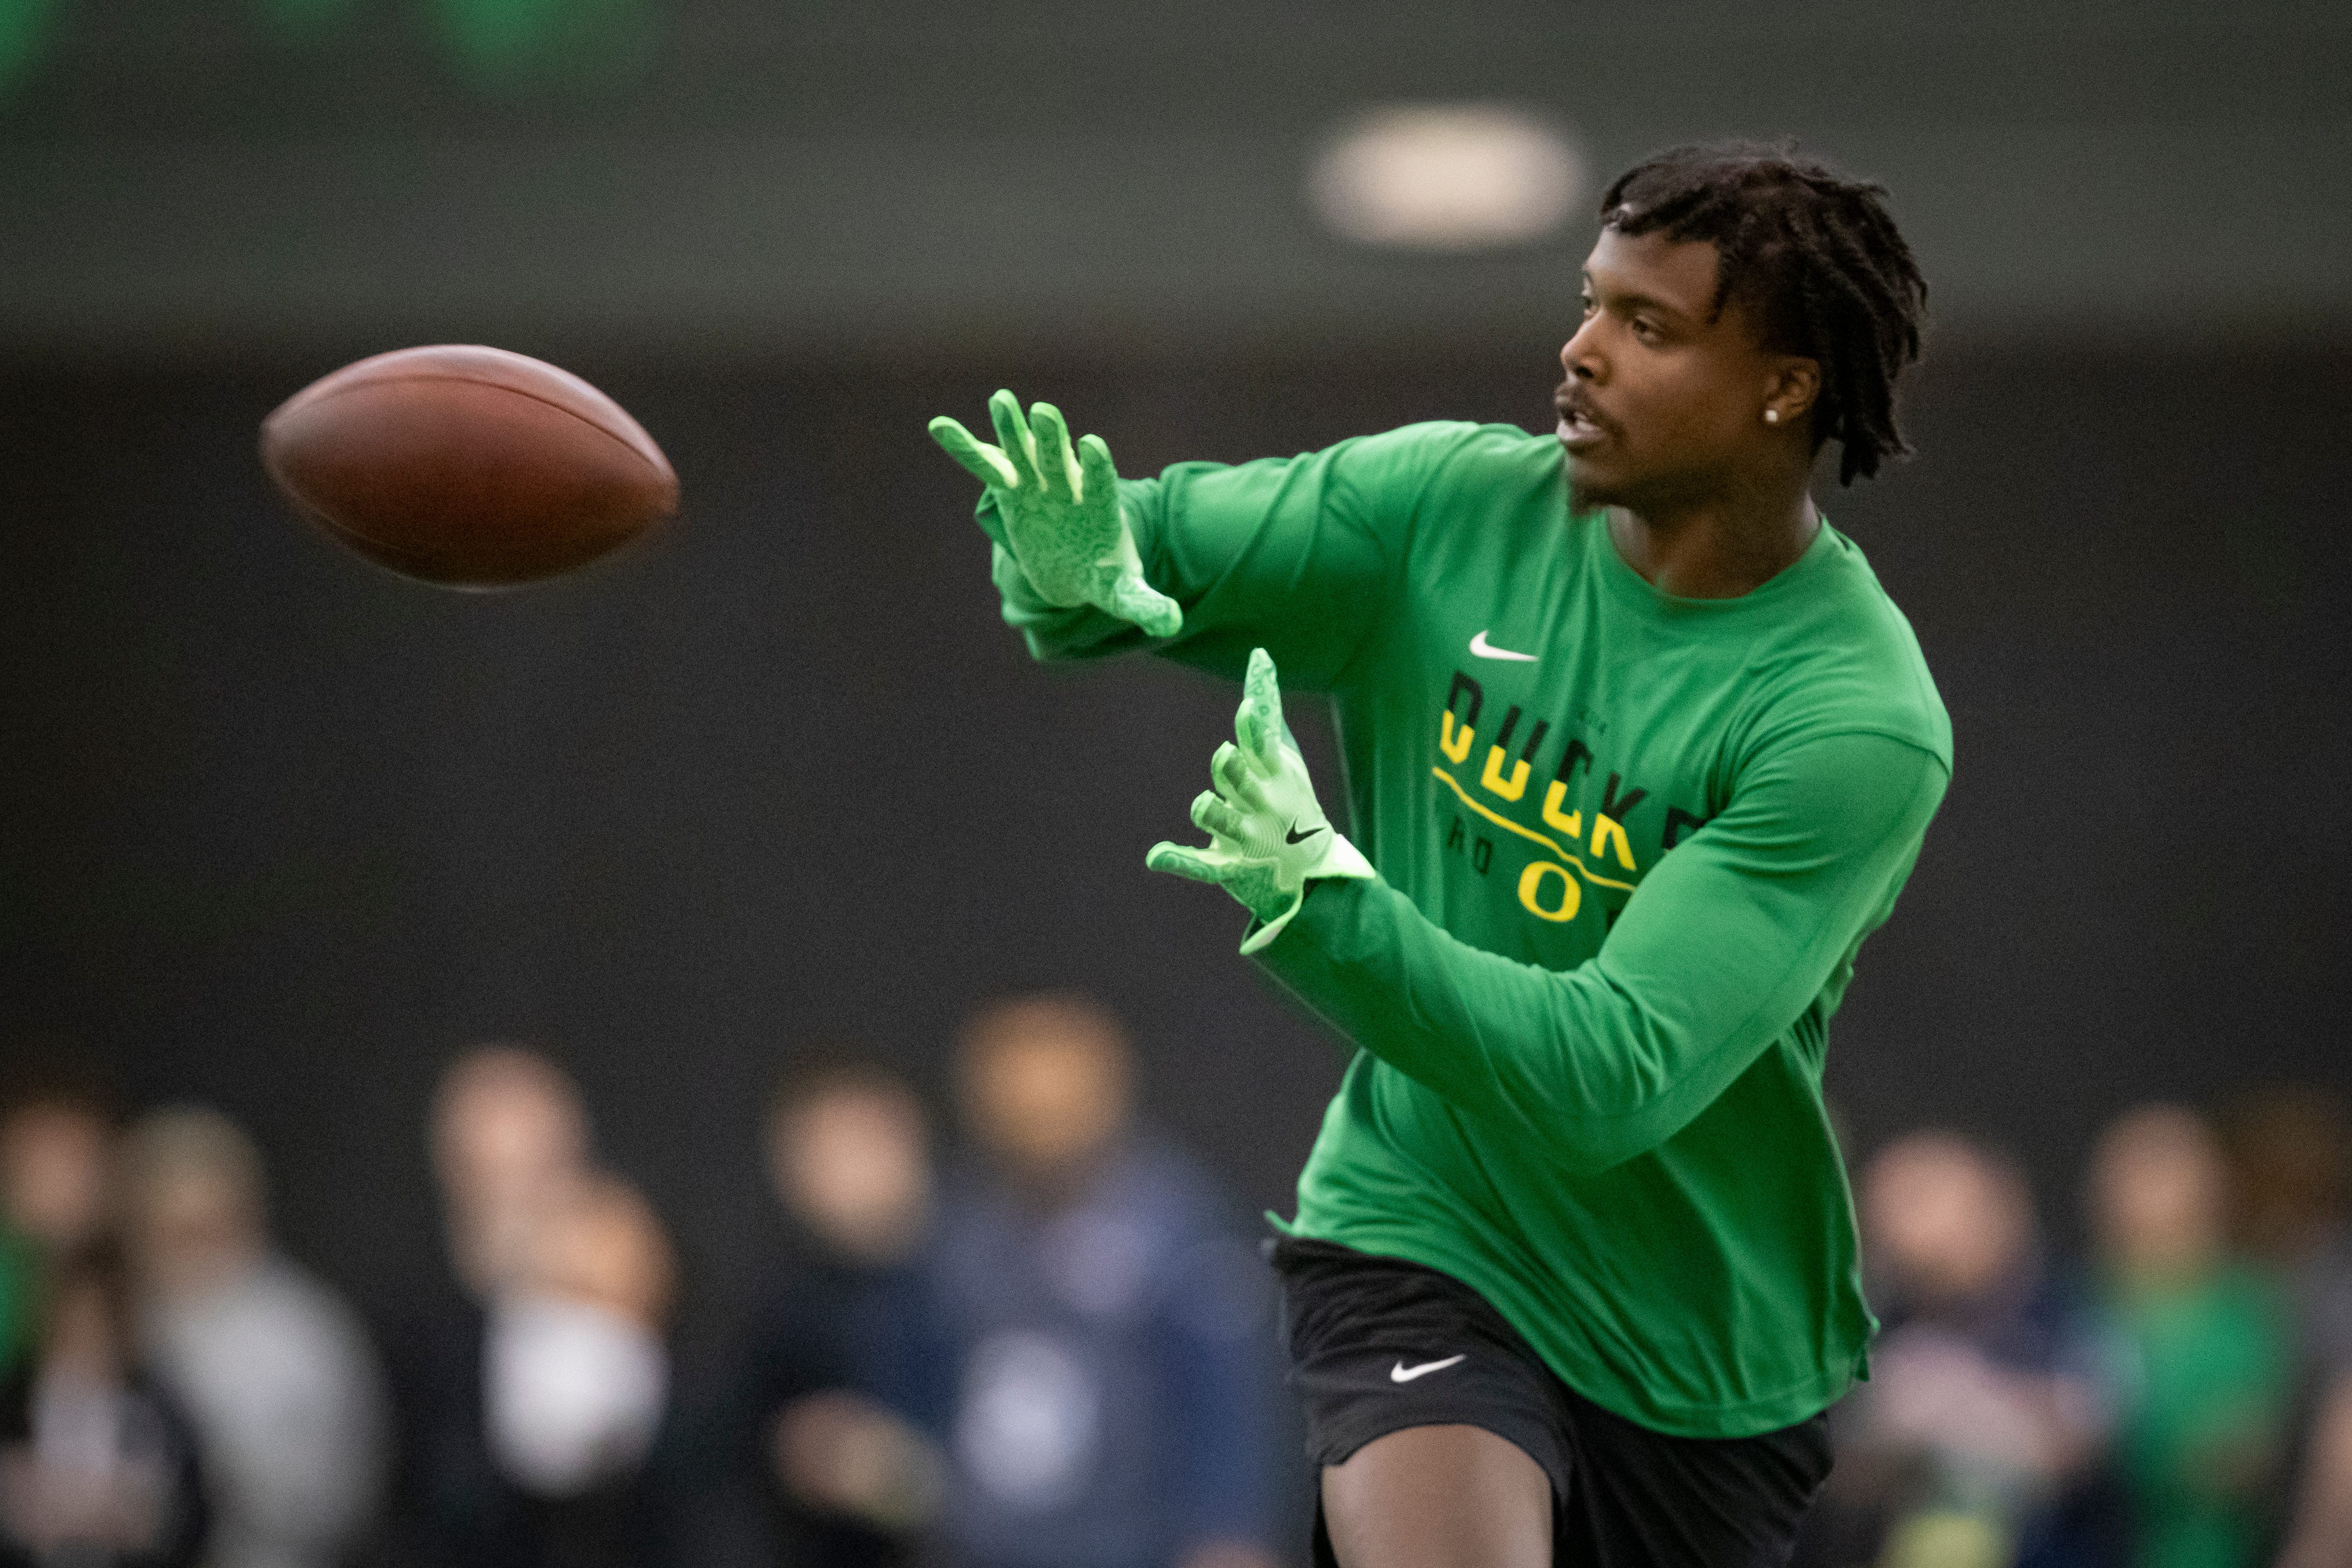 Khyree Jackson makes a catch during Oregon's Pro Day.